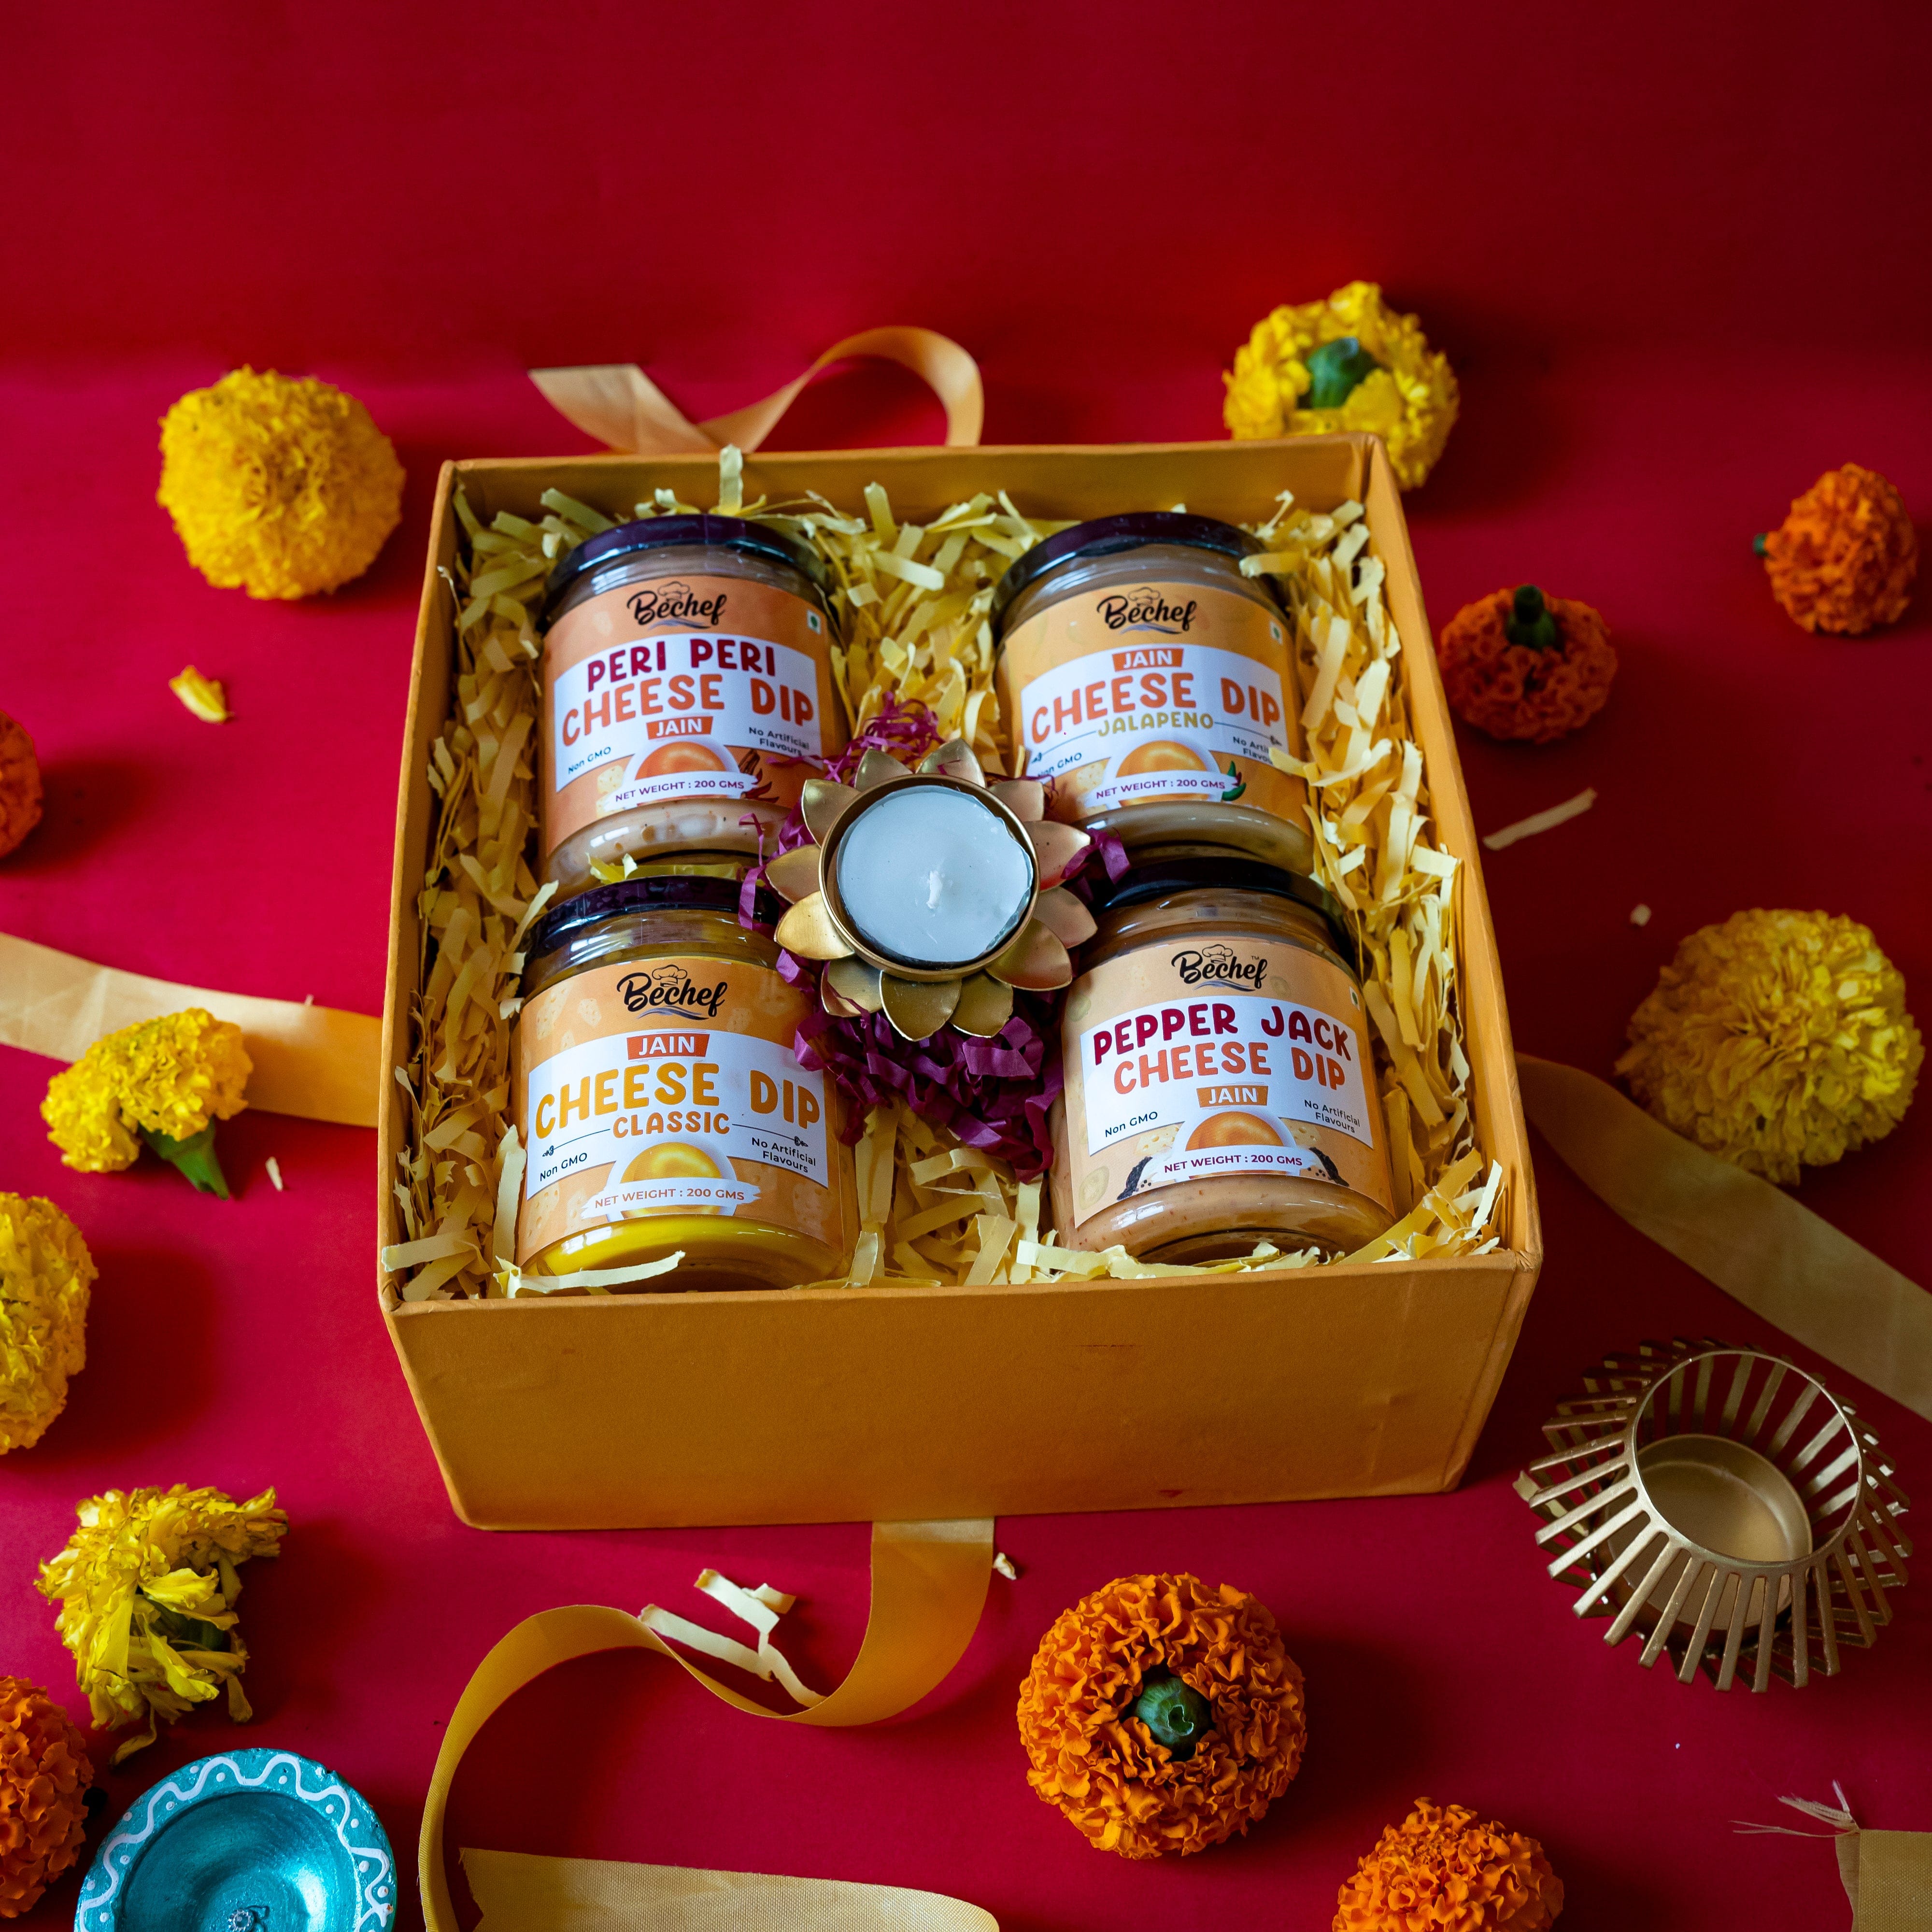 MANTOUSS Diwali Gift hampers with Dry Fruits/Dry Fruits Combo  Pack-Decorated Basket+2 Jars of Dry Fruits(Almond and Cashew)+Chocolate Gift  Box+2 Wax Filled matki Diya+4 Rangoli Colours+Diwali Card : Amazon.in:  Grocery & Gourmet Foods